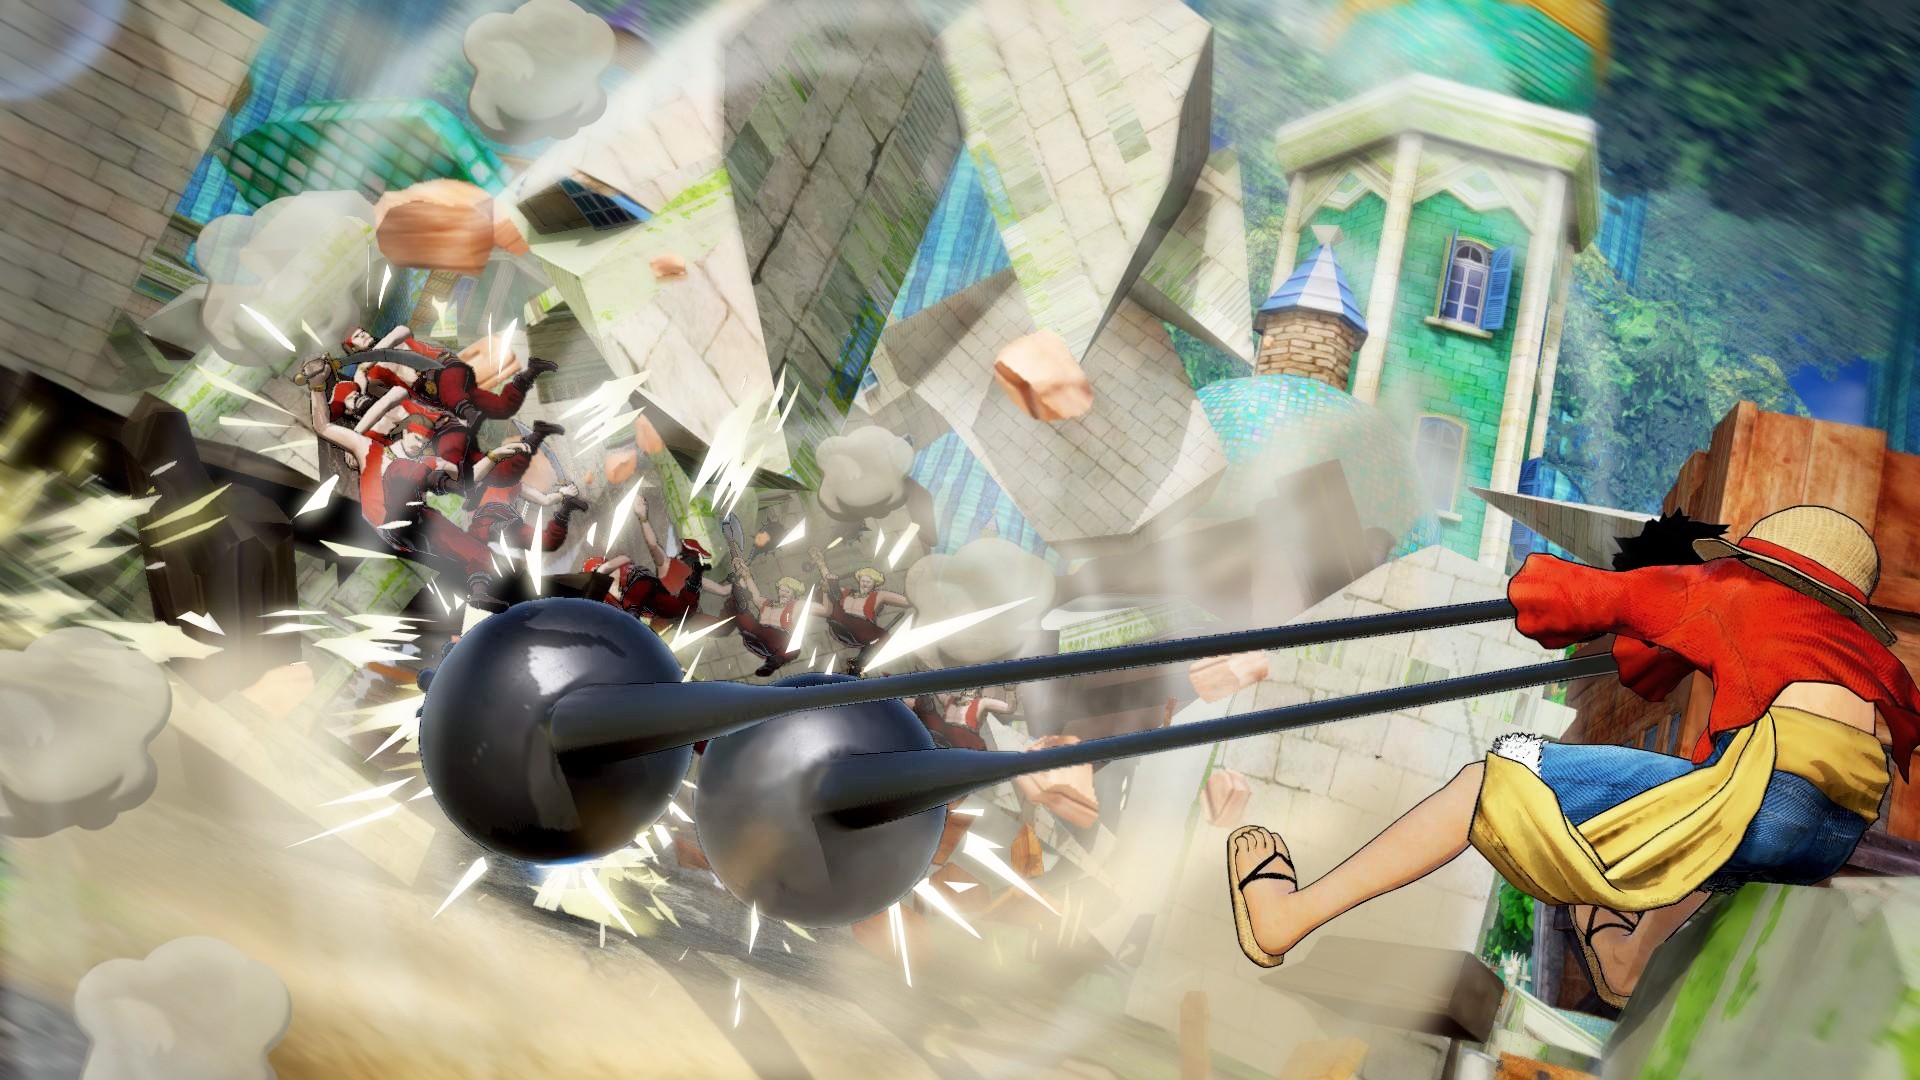 one piece,one piece: pirate warriors 4, xone, xbox one ,ps4, playstation 4 ,switch, nintendo switch, US, north america, release date, gameply, features, price, pre-order,bandai namco, omega force, koei tecmo, adds playable character, carrot, new playable character